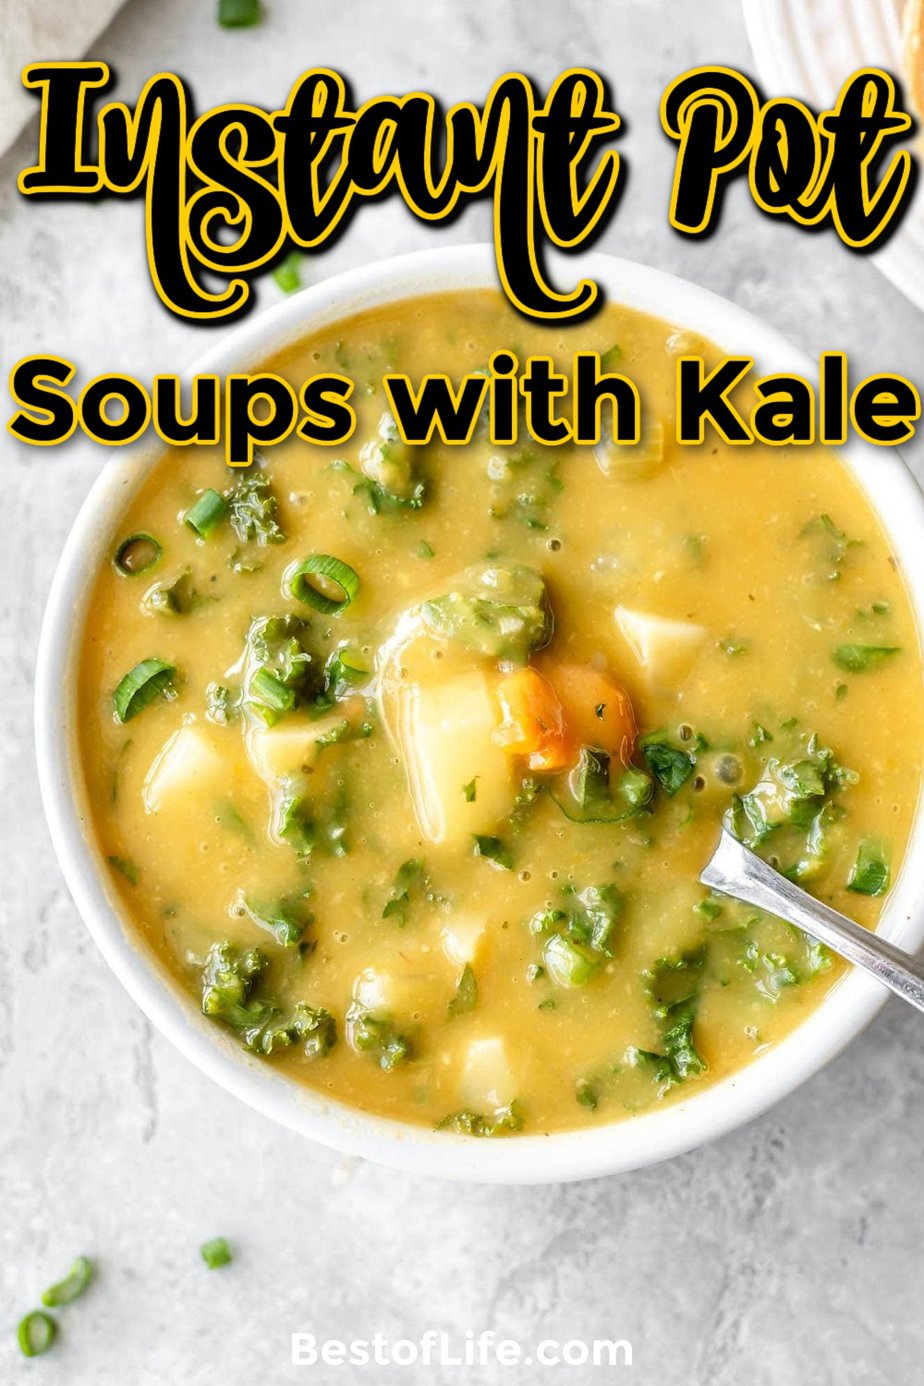 The best Instant Pot soups with kale can help you get the nutritional benefits of kale and enjoy the flavor too! Healthy Soup Recipes | Instant Pot Soup Recipes | Healthy Side Dish Recipes | Homemade Soup Tips | Healthy Sides | Pressure Cooker Soup Recipes | Instant Pot Recipes with Kale | Kale Soup Recipes | Soup Recipes with Kale #kalerecipes #instantpotsoups